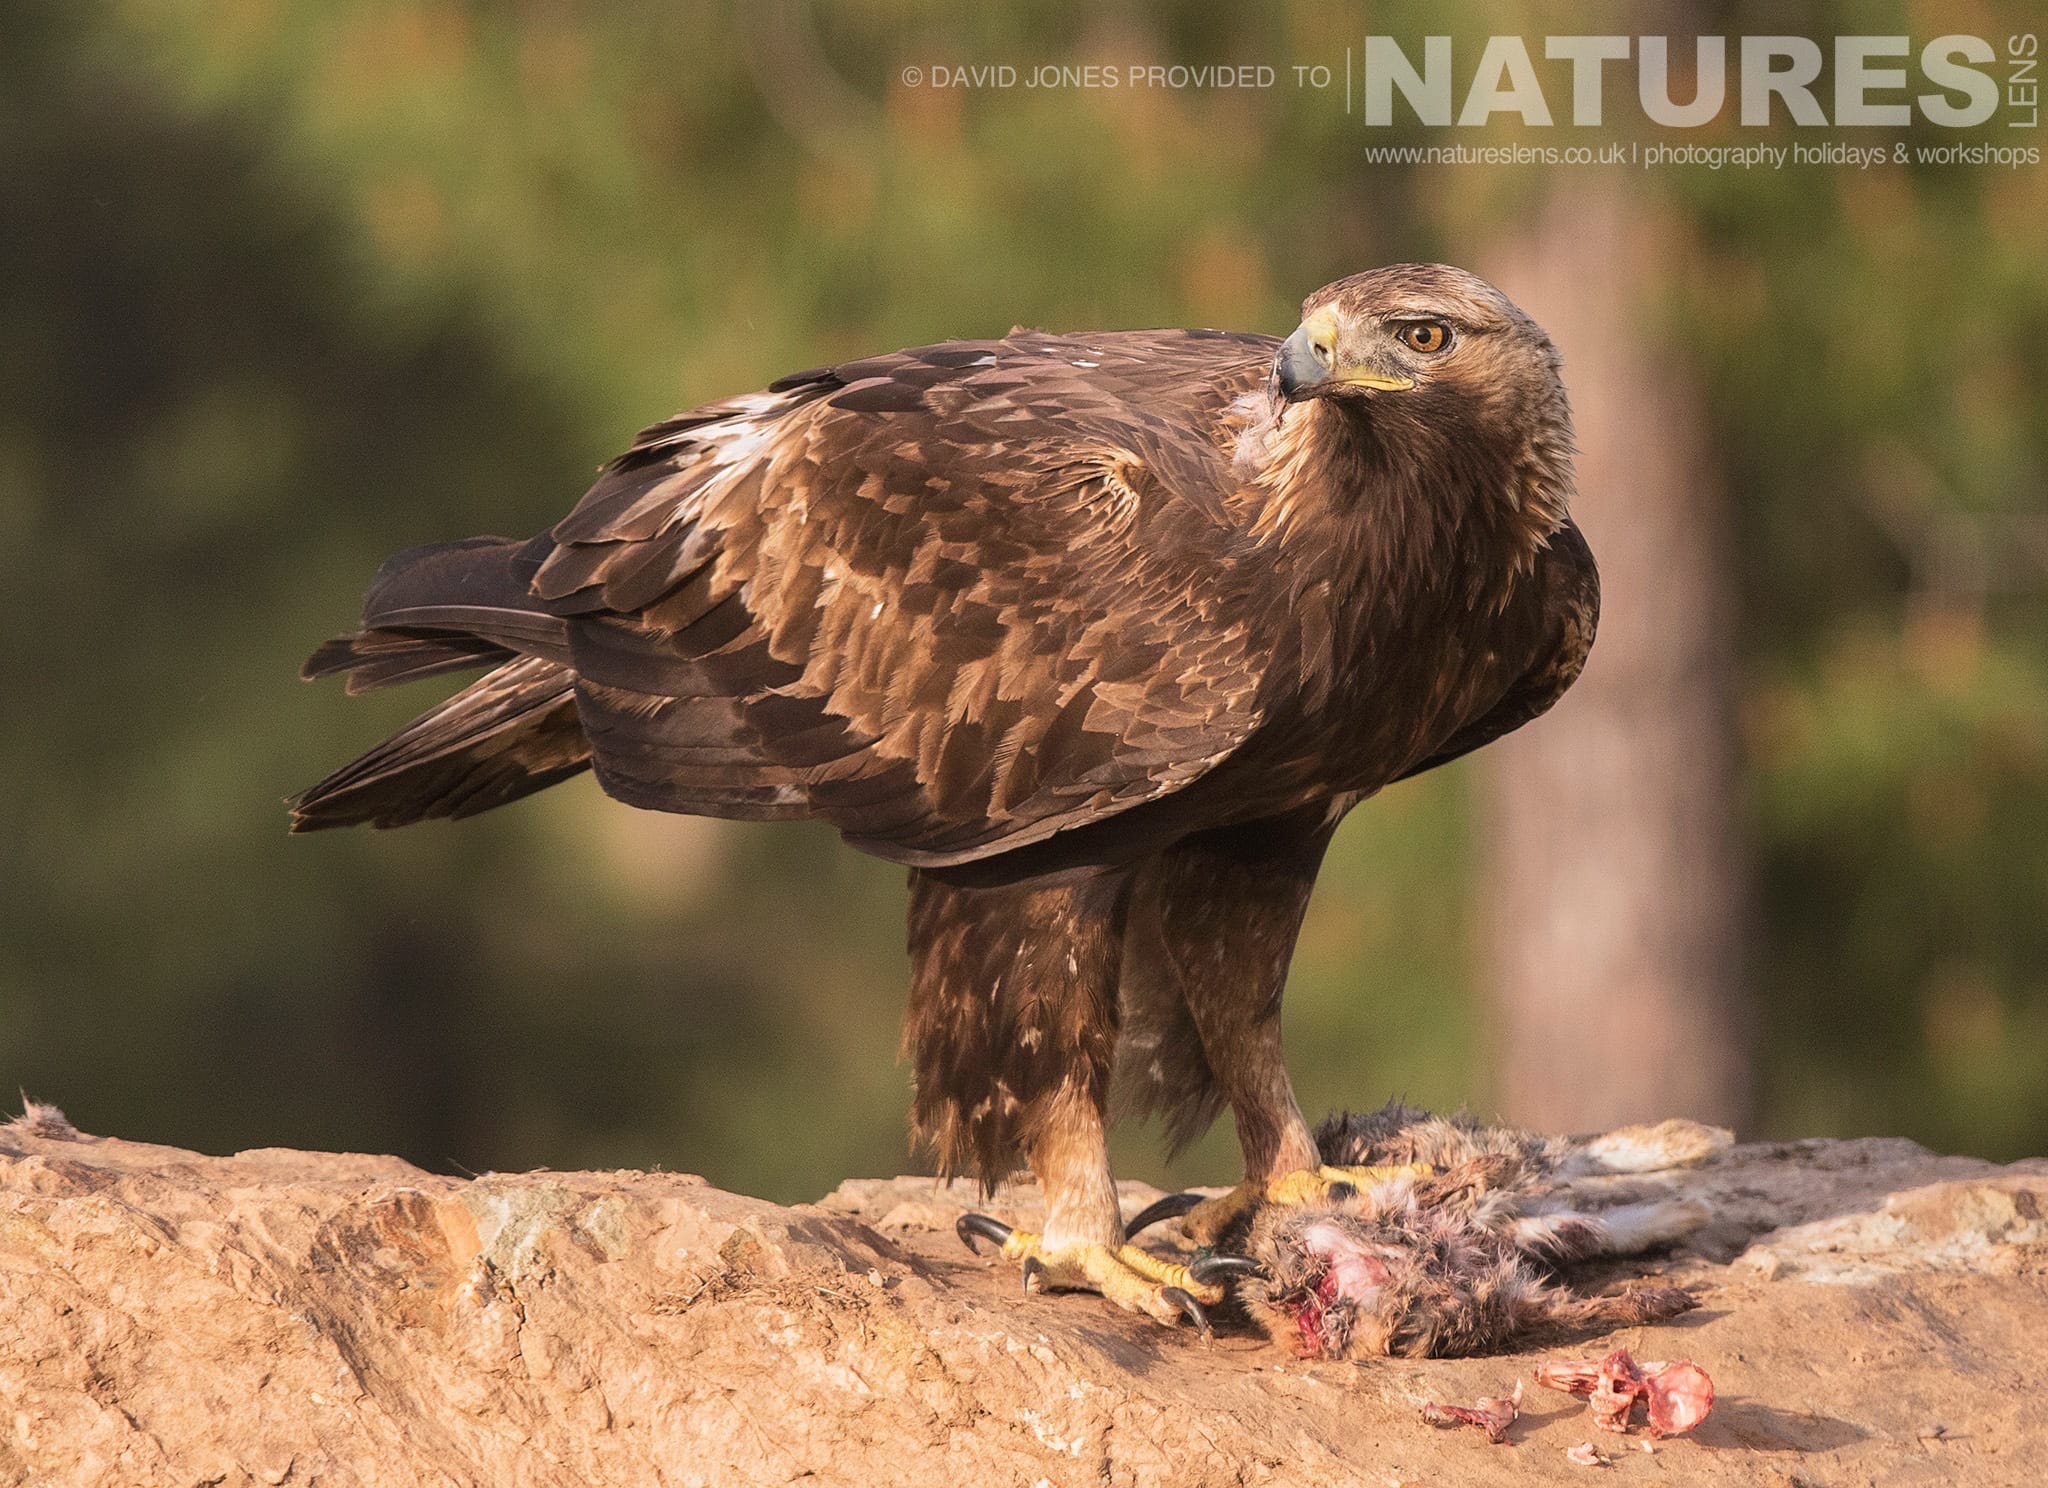 Golden Eagle photographed on one of the pair of NaturesLens Wildlife Photography Holidays to capture images of the Birds of Spain